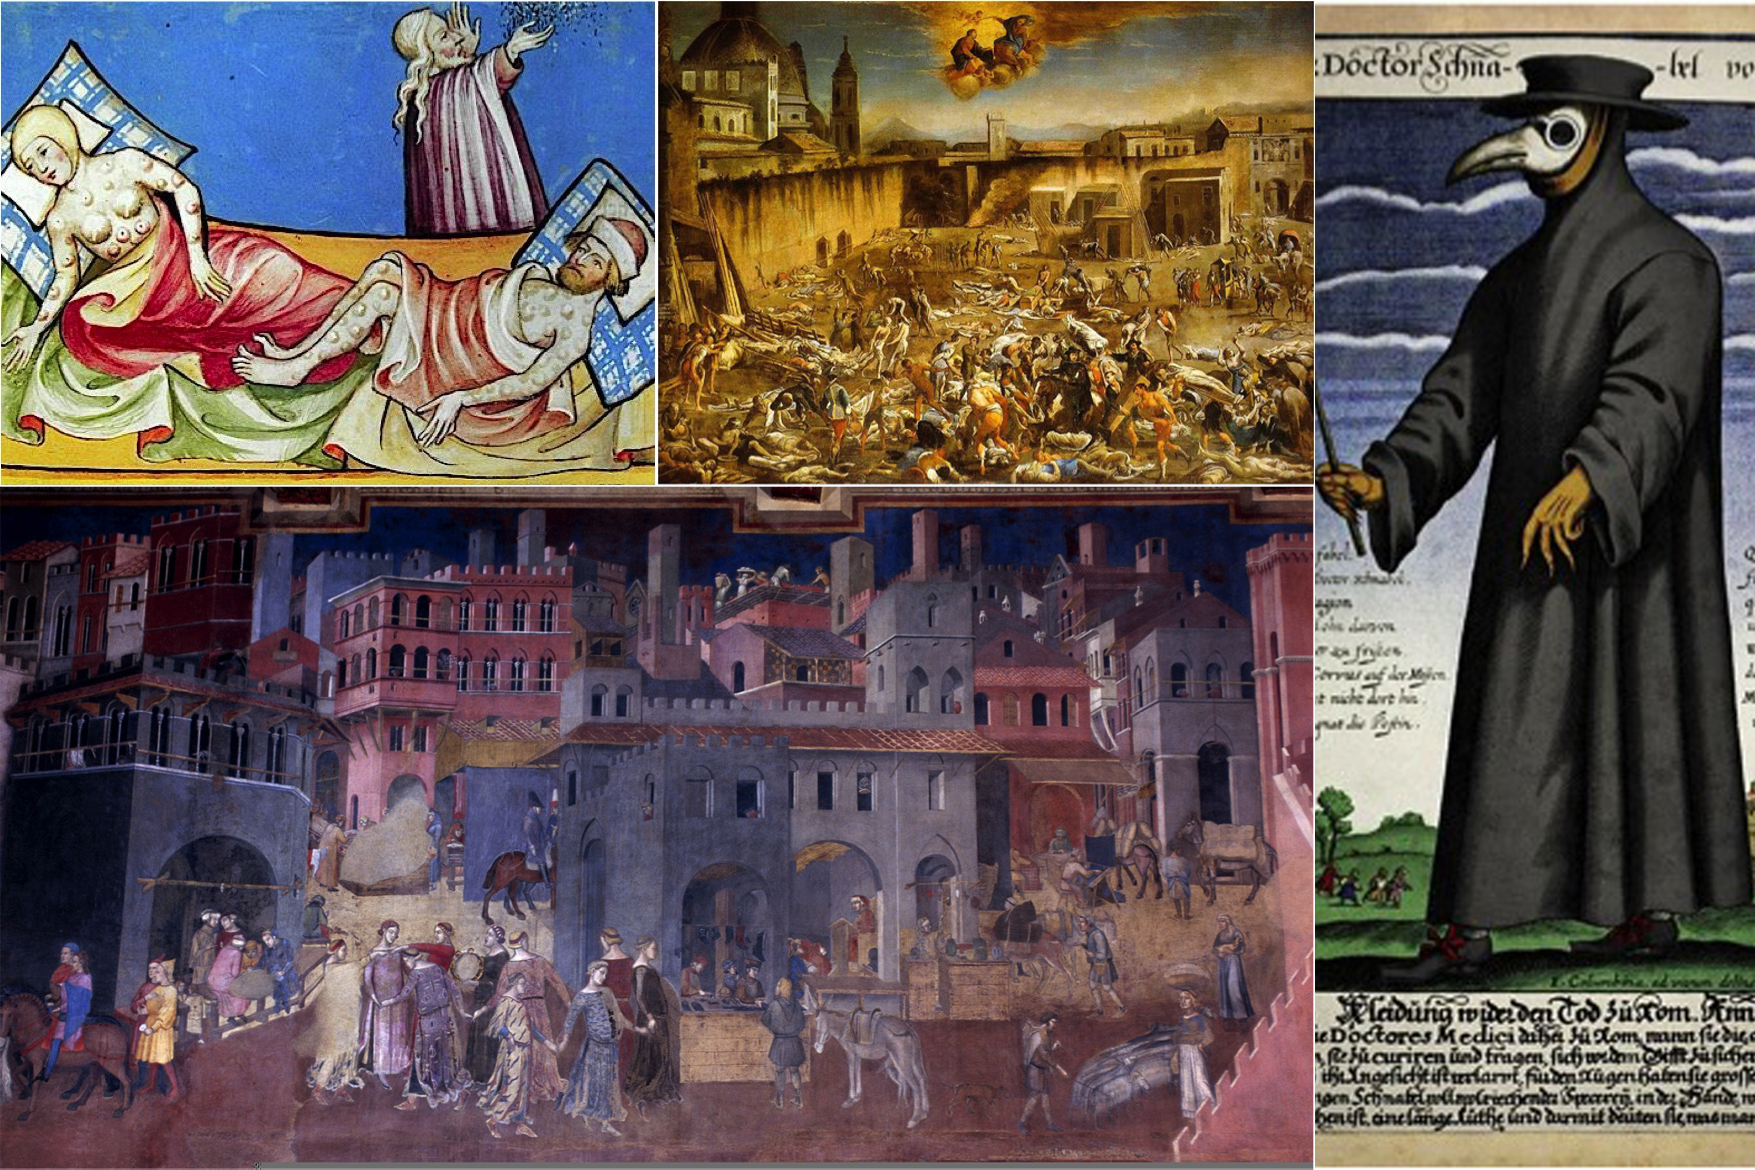 Image on the bottom left: A painting by Ambrogio Lorenzetti is an example of art in Europe before the bubonic plague. Other images show how art changed after the plague.